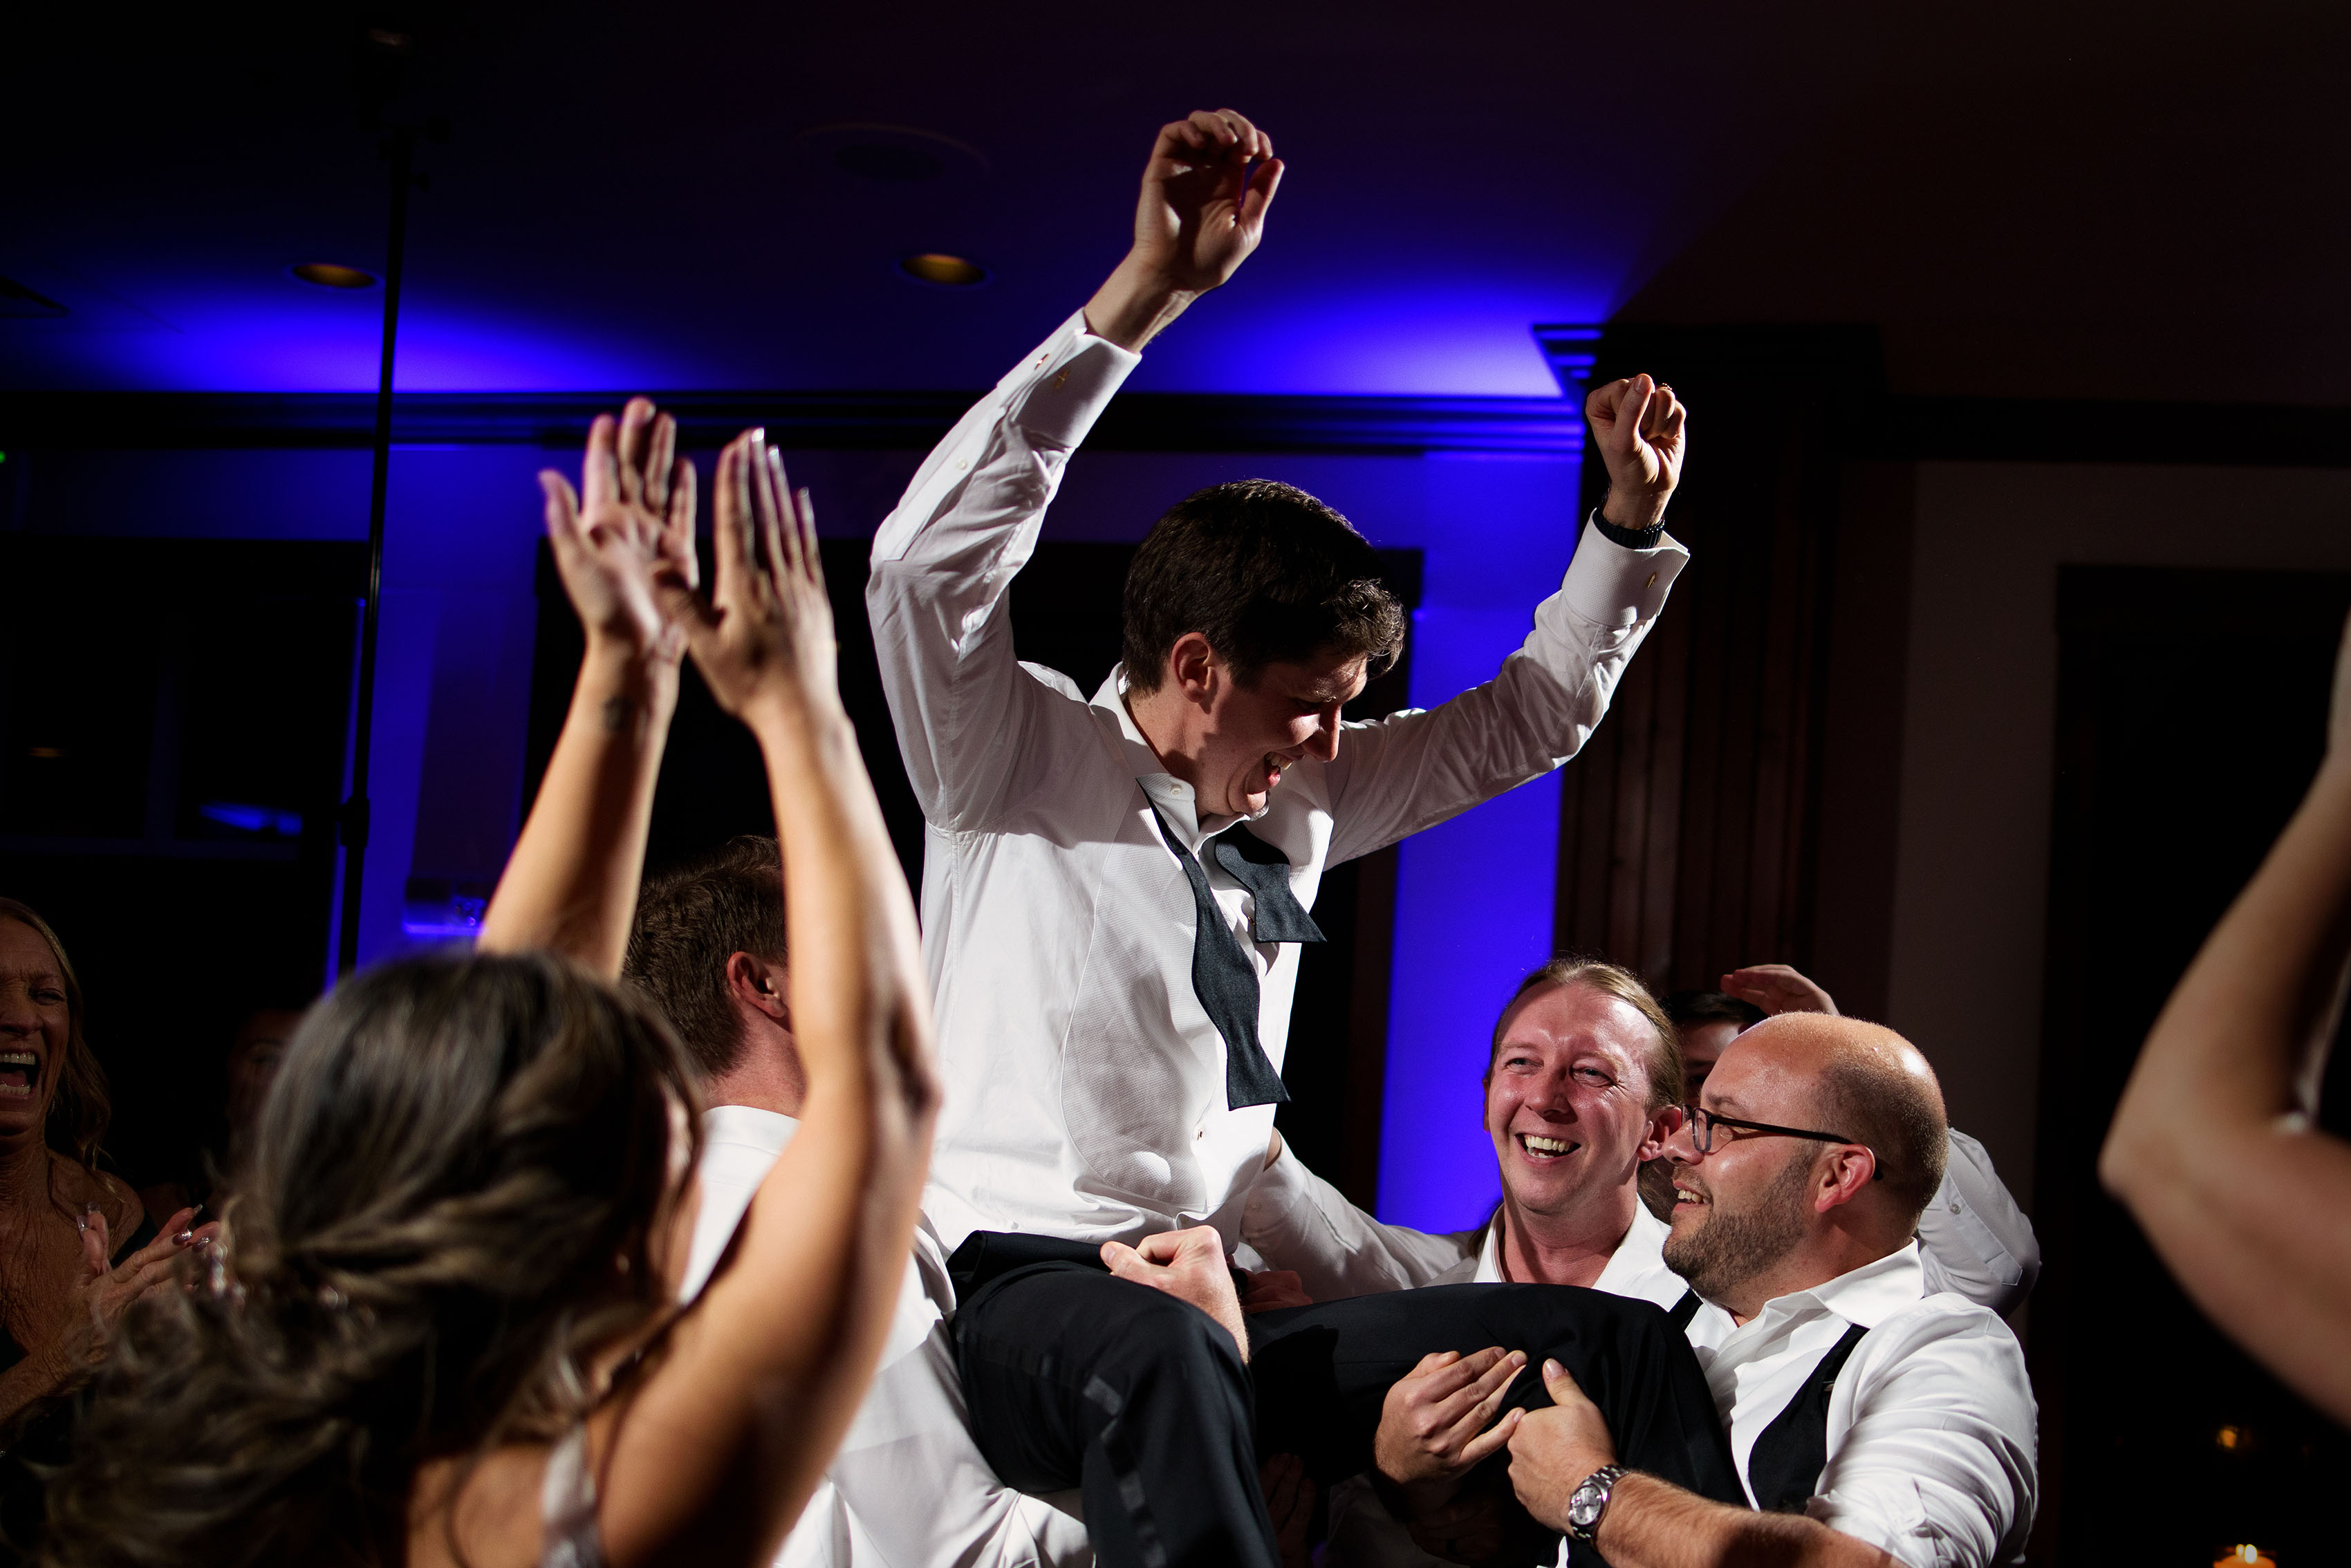 Guests dance during a wedding at Main Street Station in Breckenridge